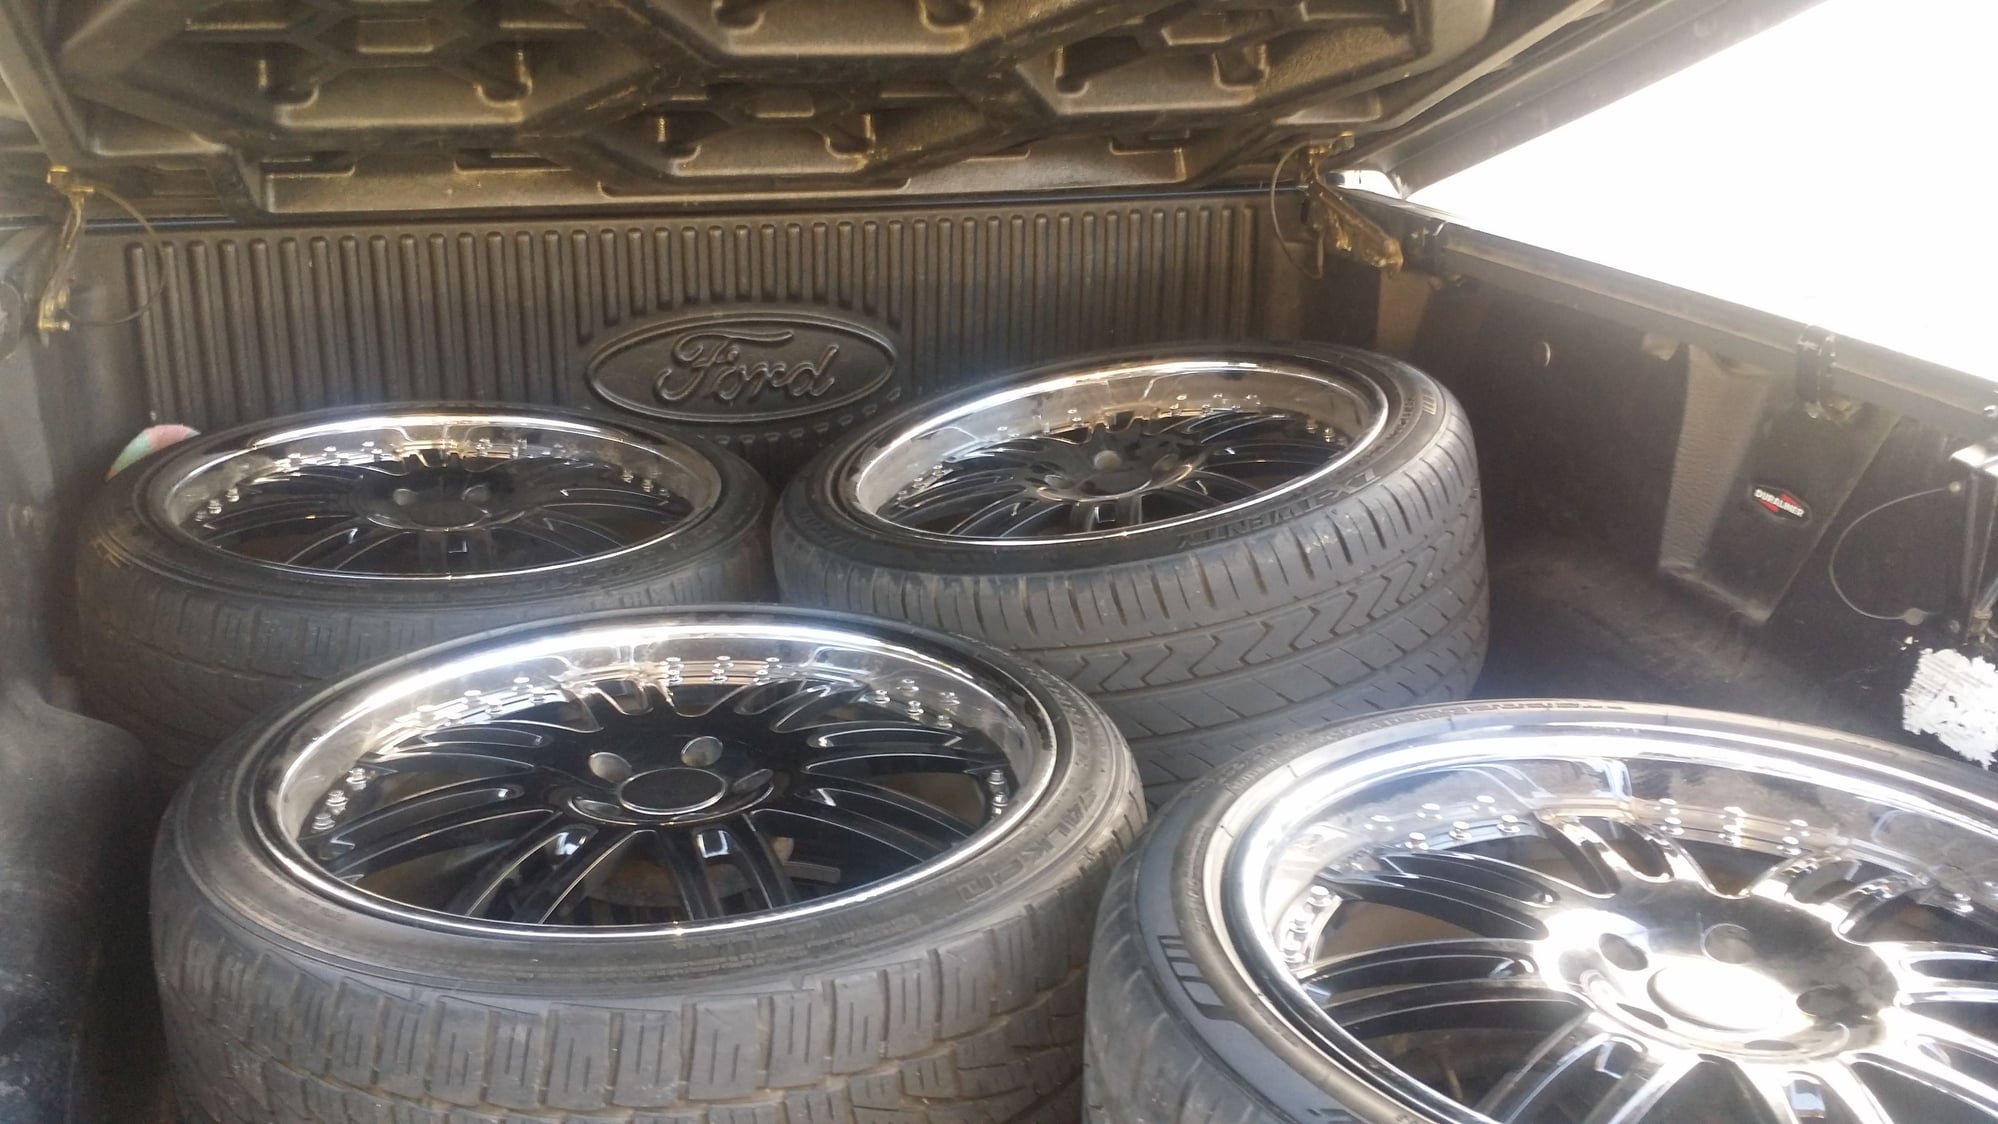 Wheels and Tires/Axles - 20" staggered 3 piece rims w like new tires - Used - Spring Hill, FL 34608, United States